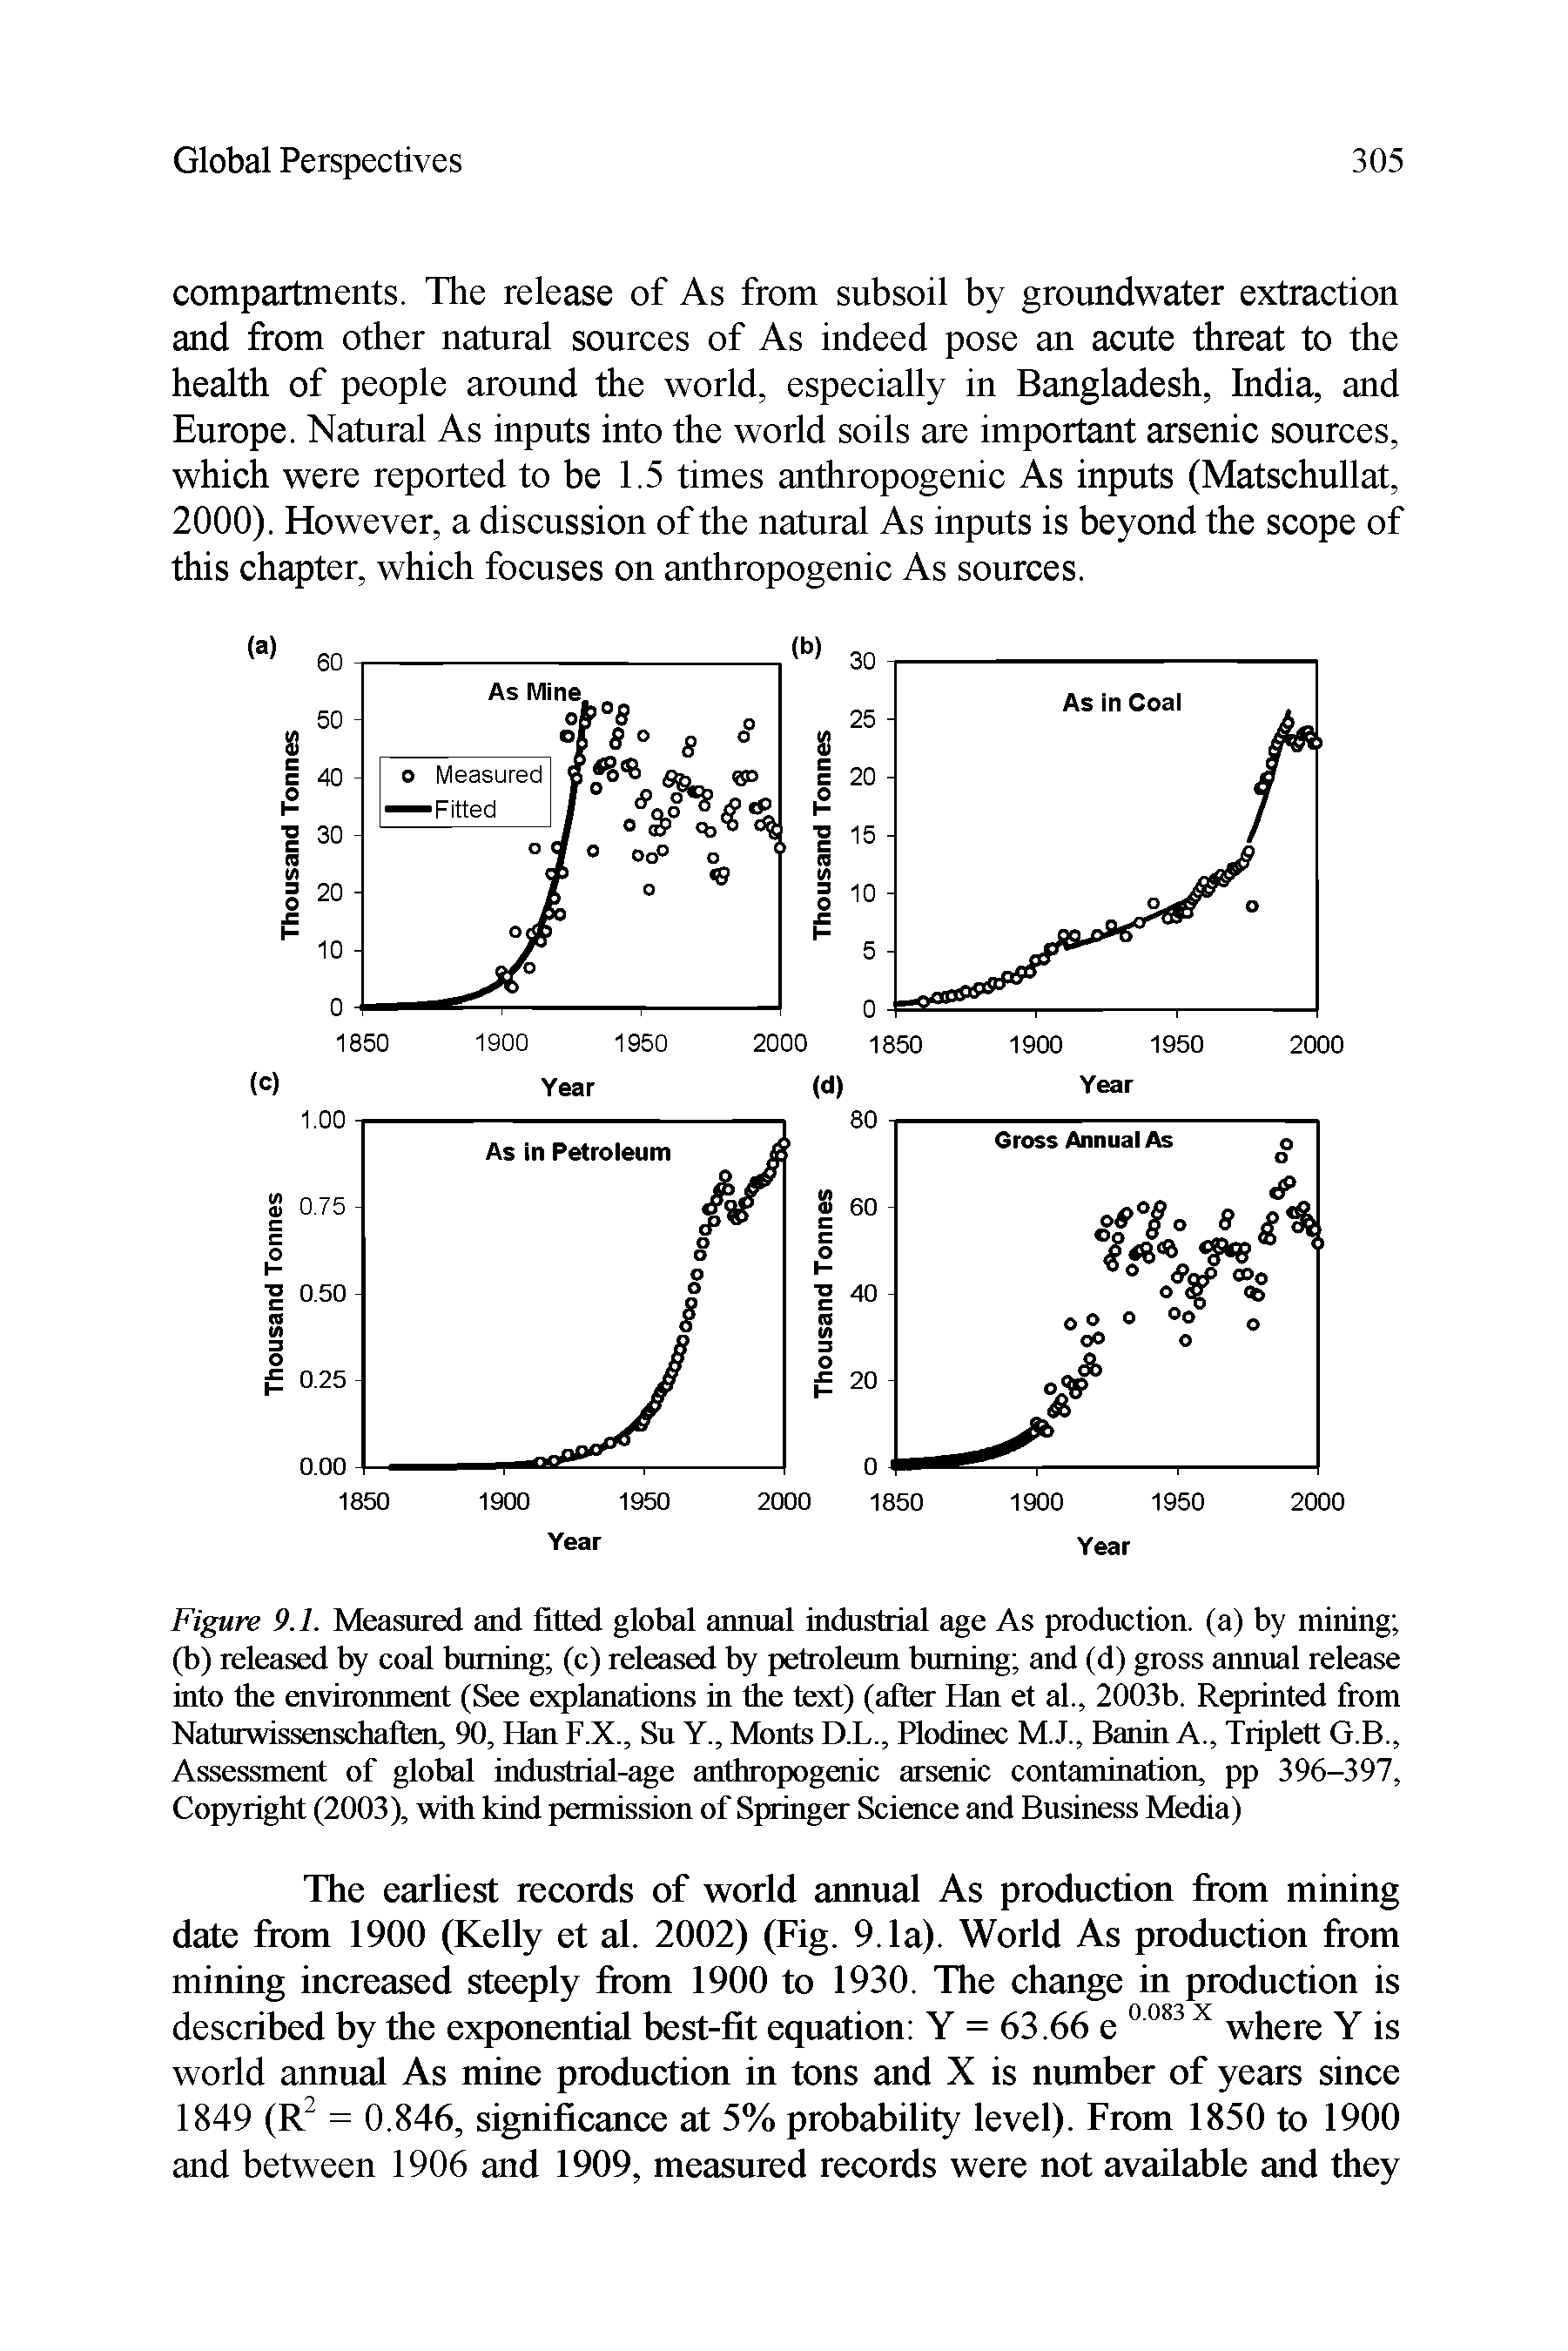 Figure 9.1. Measured and fitted global annual industrial age As production, (a) by mining (b) released by coal burning (c) released by petroleum burning and (d) gross annual release into the environment (See explanations in the text) (after Han et al., 2003b. Reprinted from Naturwissenschaften, 90, Han F.X., Su Y., Monts D.L., Plodinec M.J., Banin A., Triplett G.B., Assessment of global industrial-age anthropogenic arsenic contamination, pp 396-397, Copyright (2003), with kind permission of Springer Science and Business Media)...